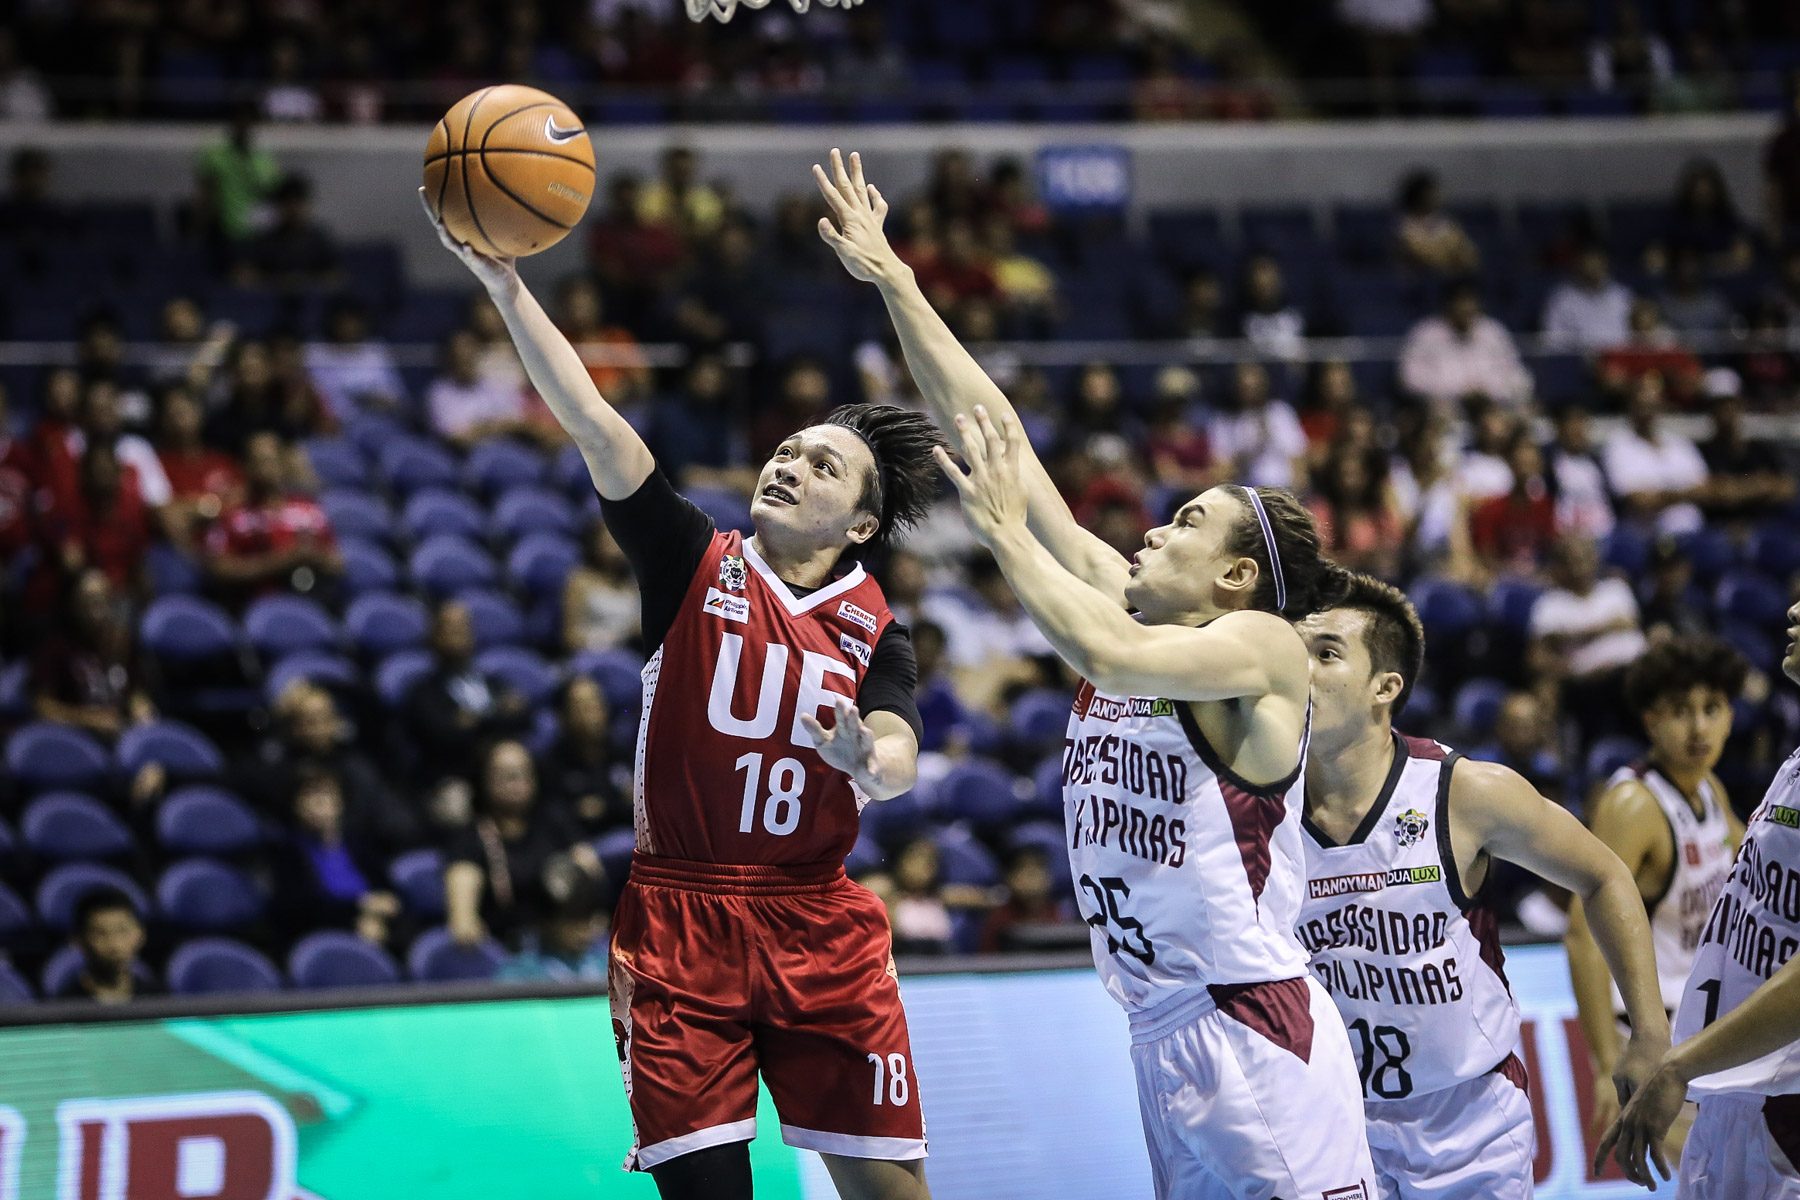 Red Warriors’ win sets back UP’s chances for a final four berth